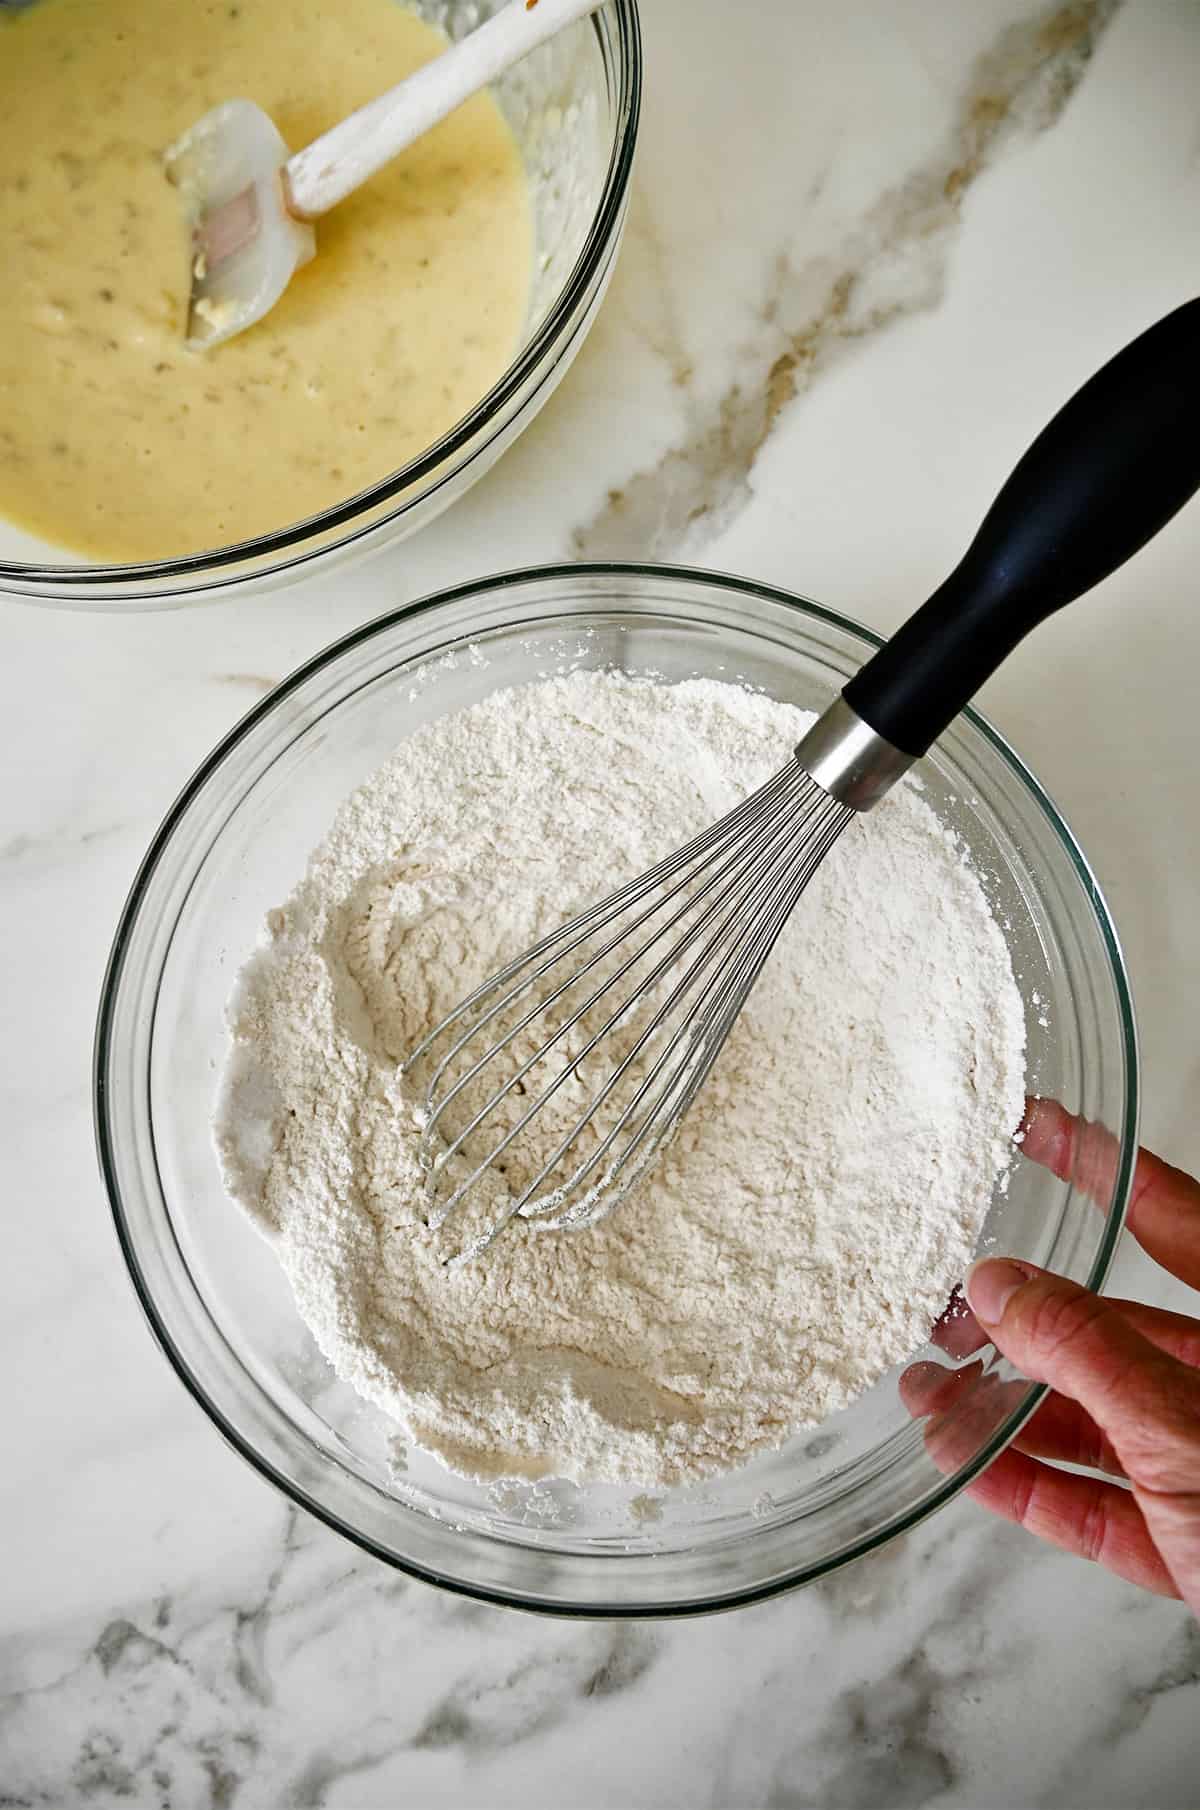 A glass bowl containing mashed bananas whisked together with eggs next to a glass bowl containing flour and a whisk. 